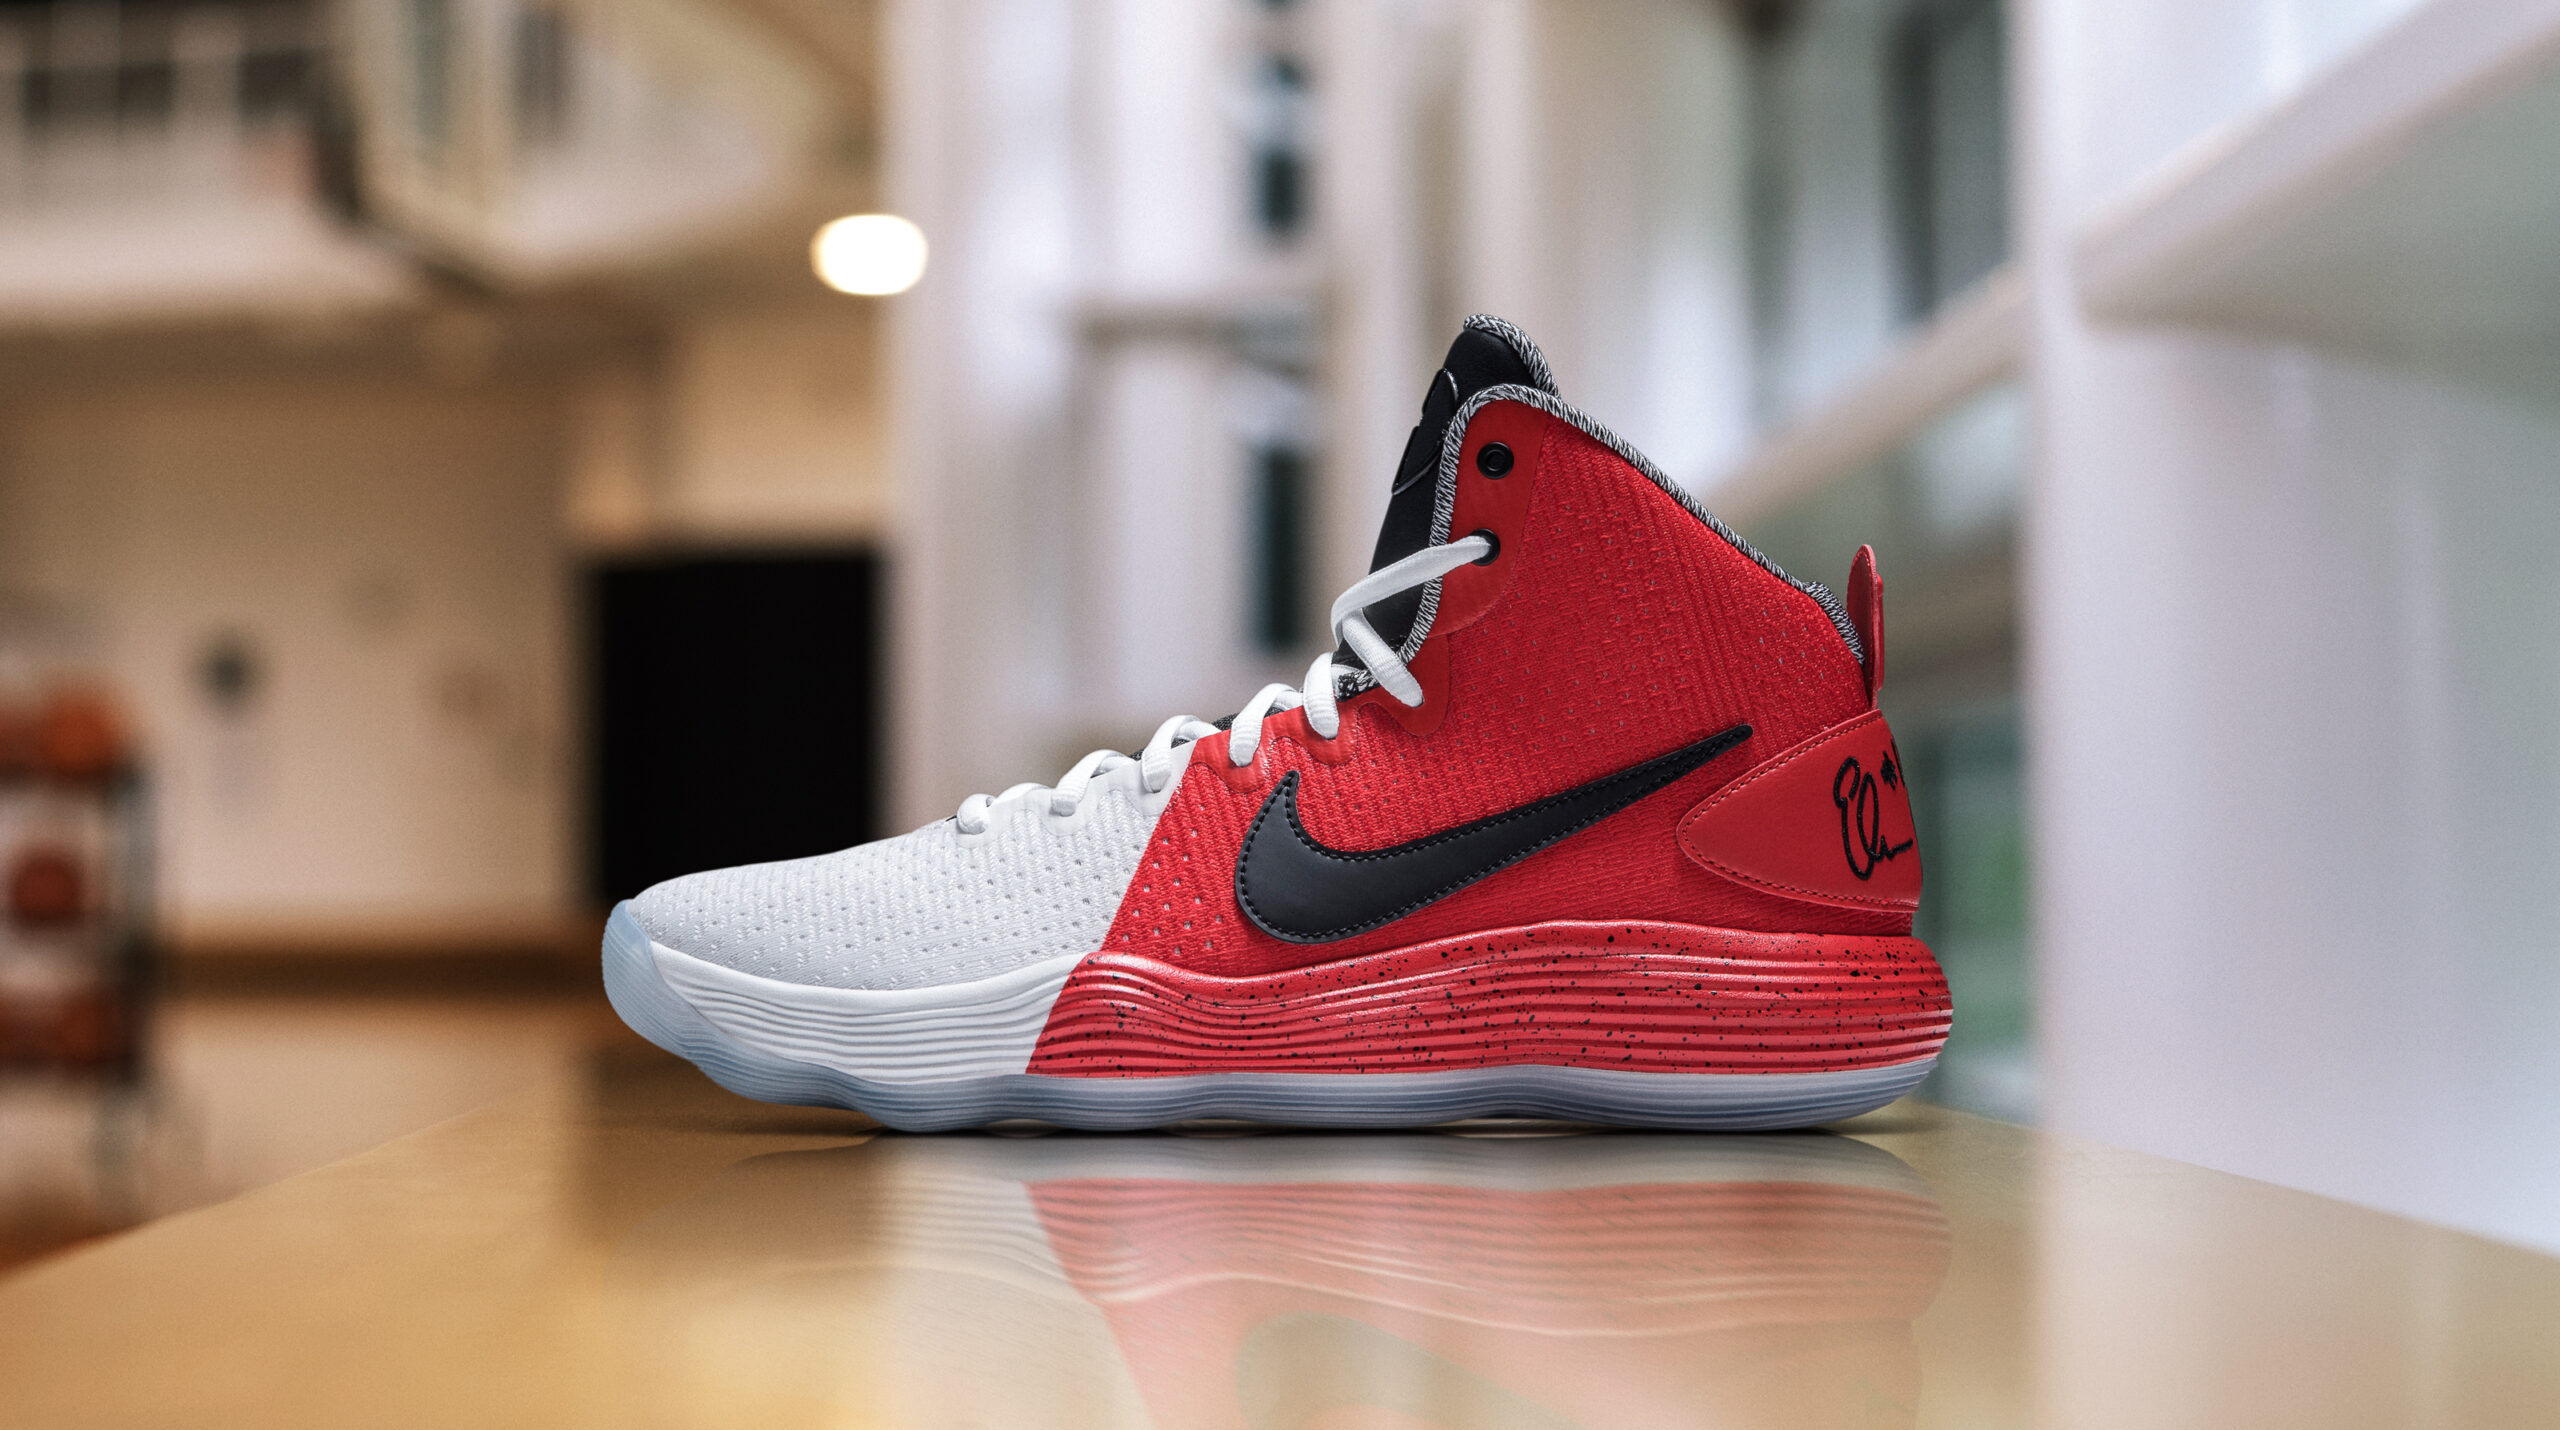 Elena Delle Donne honors Sheryl Swoopes with a player exclusive Nike React Hyperdunk 2017